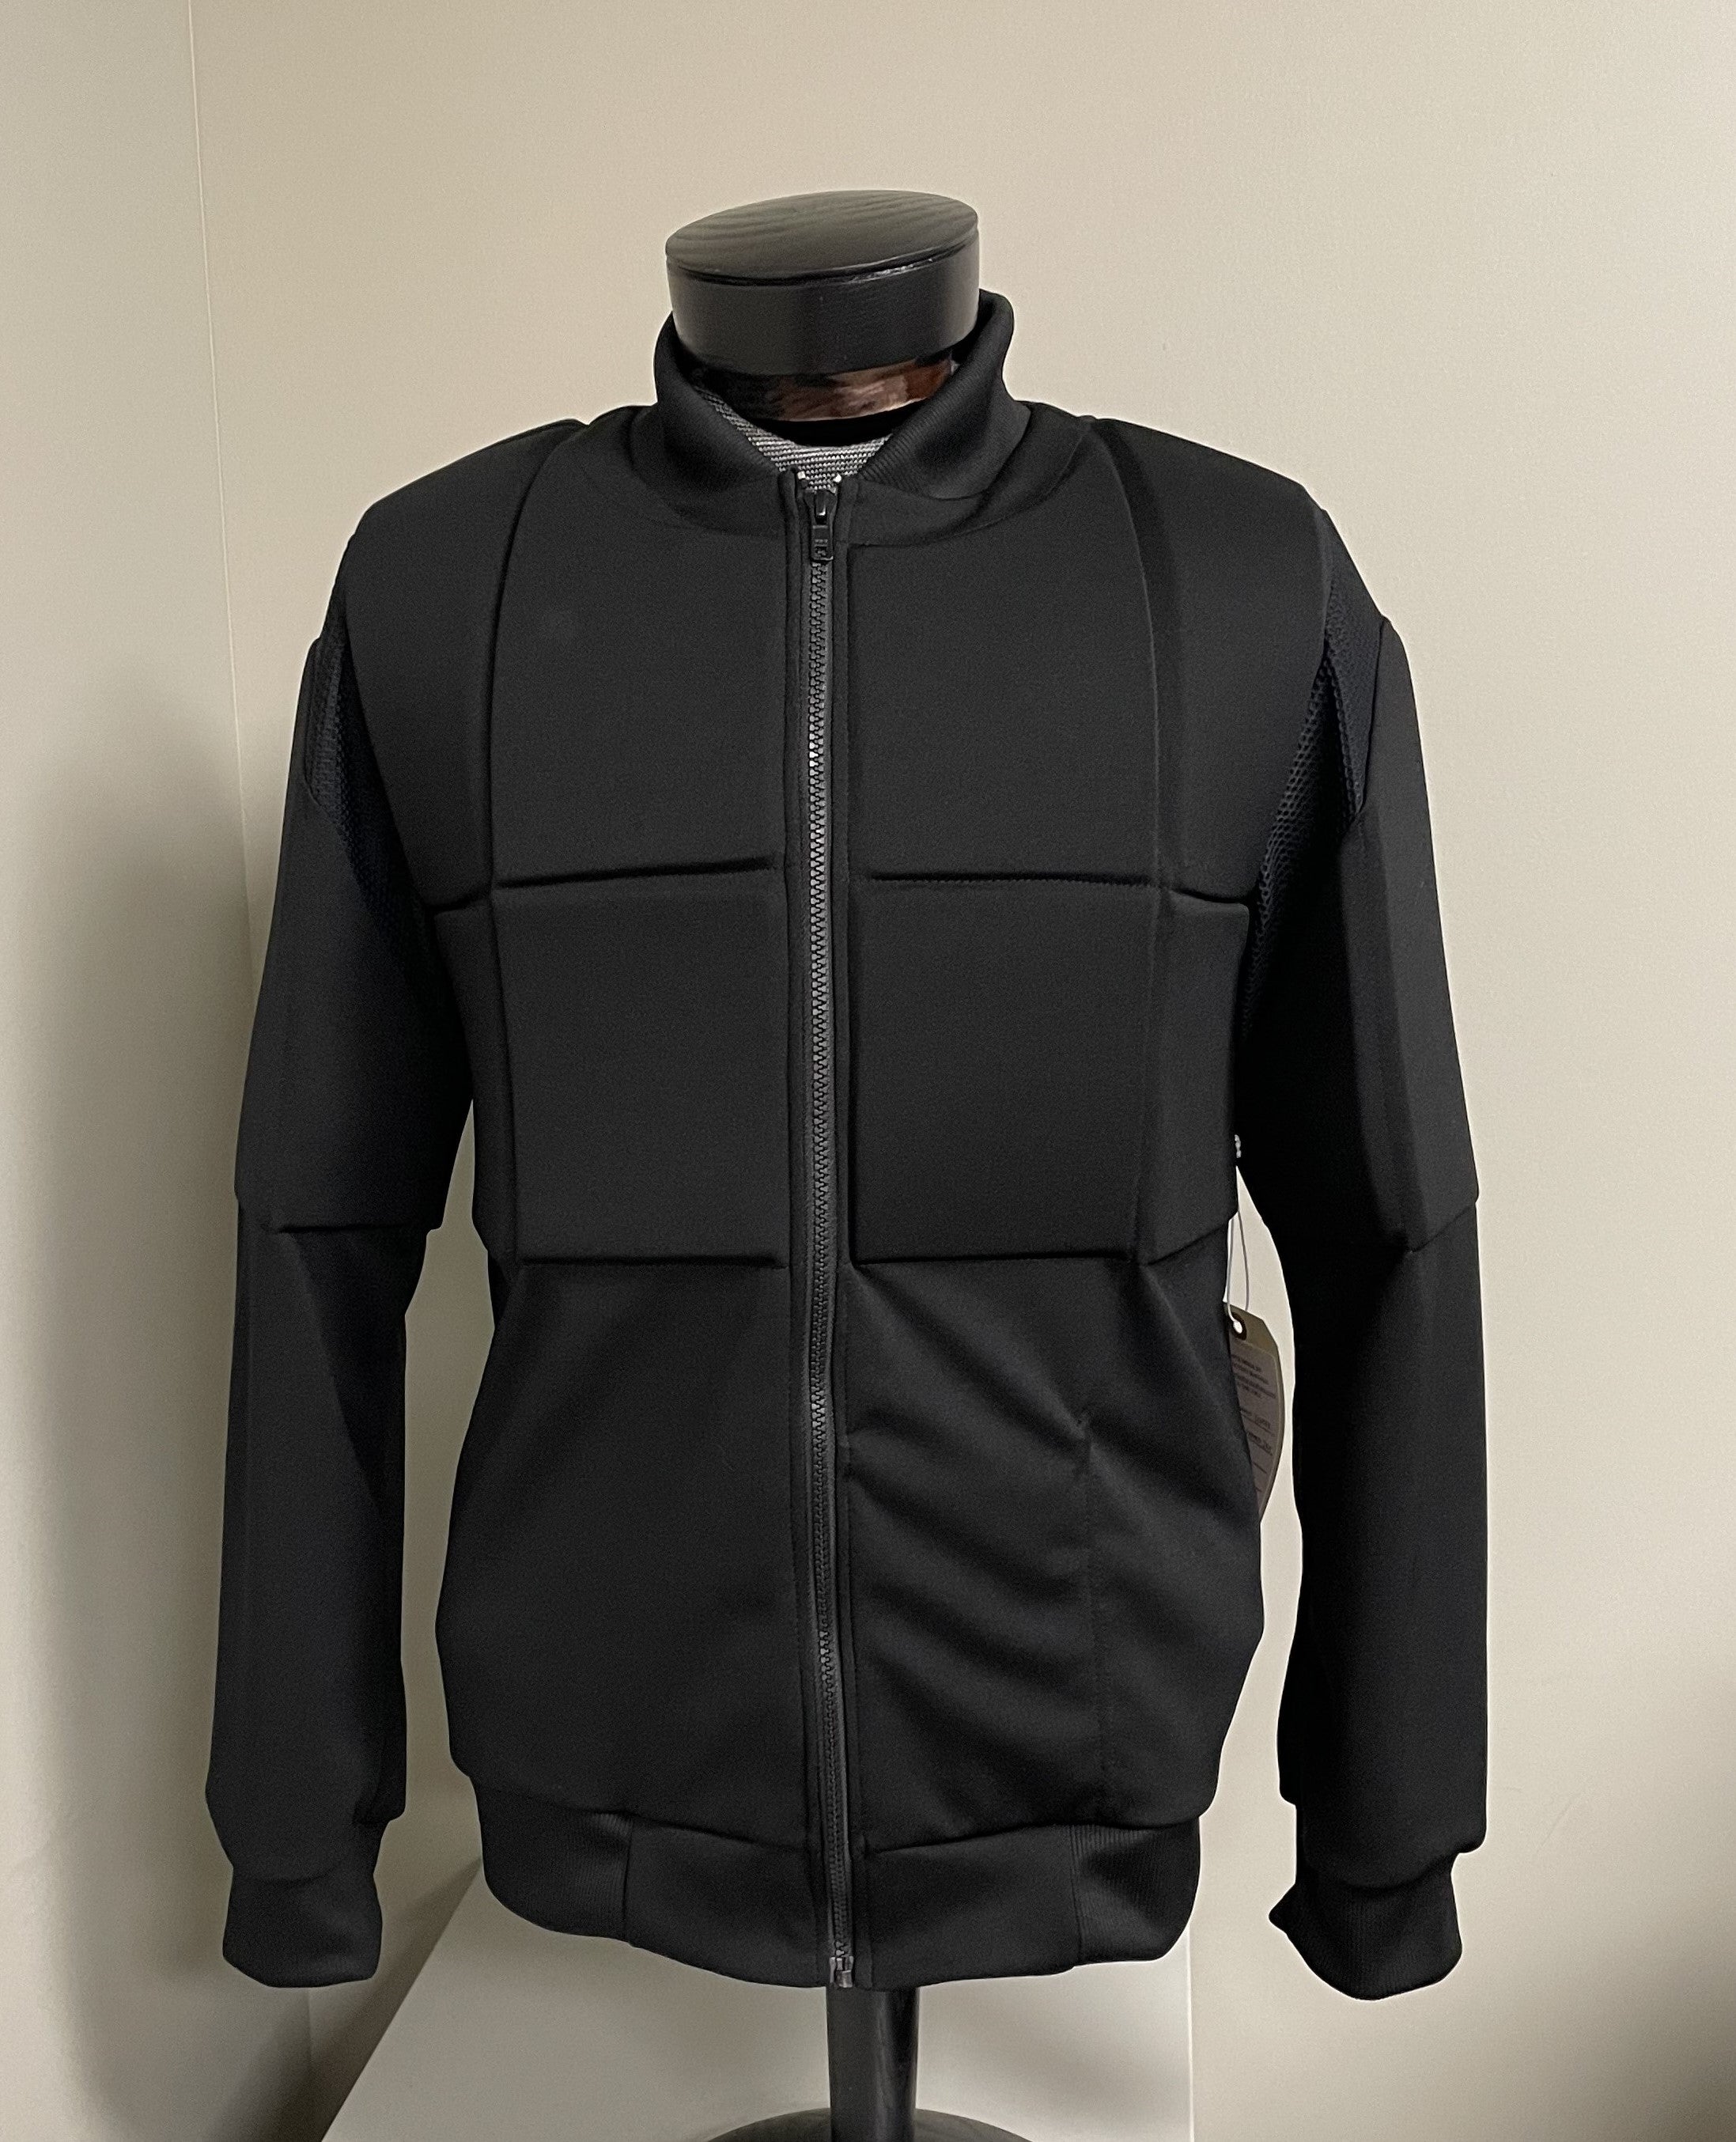 Safeguard Protective Apparel Launching a new Jacket for Total Protection